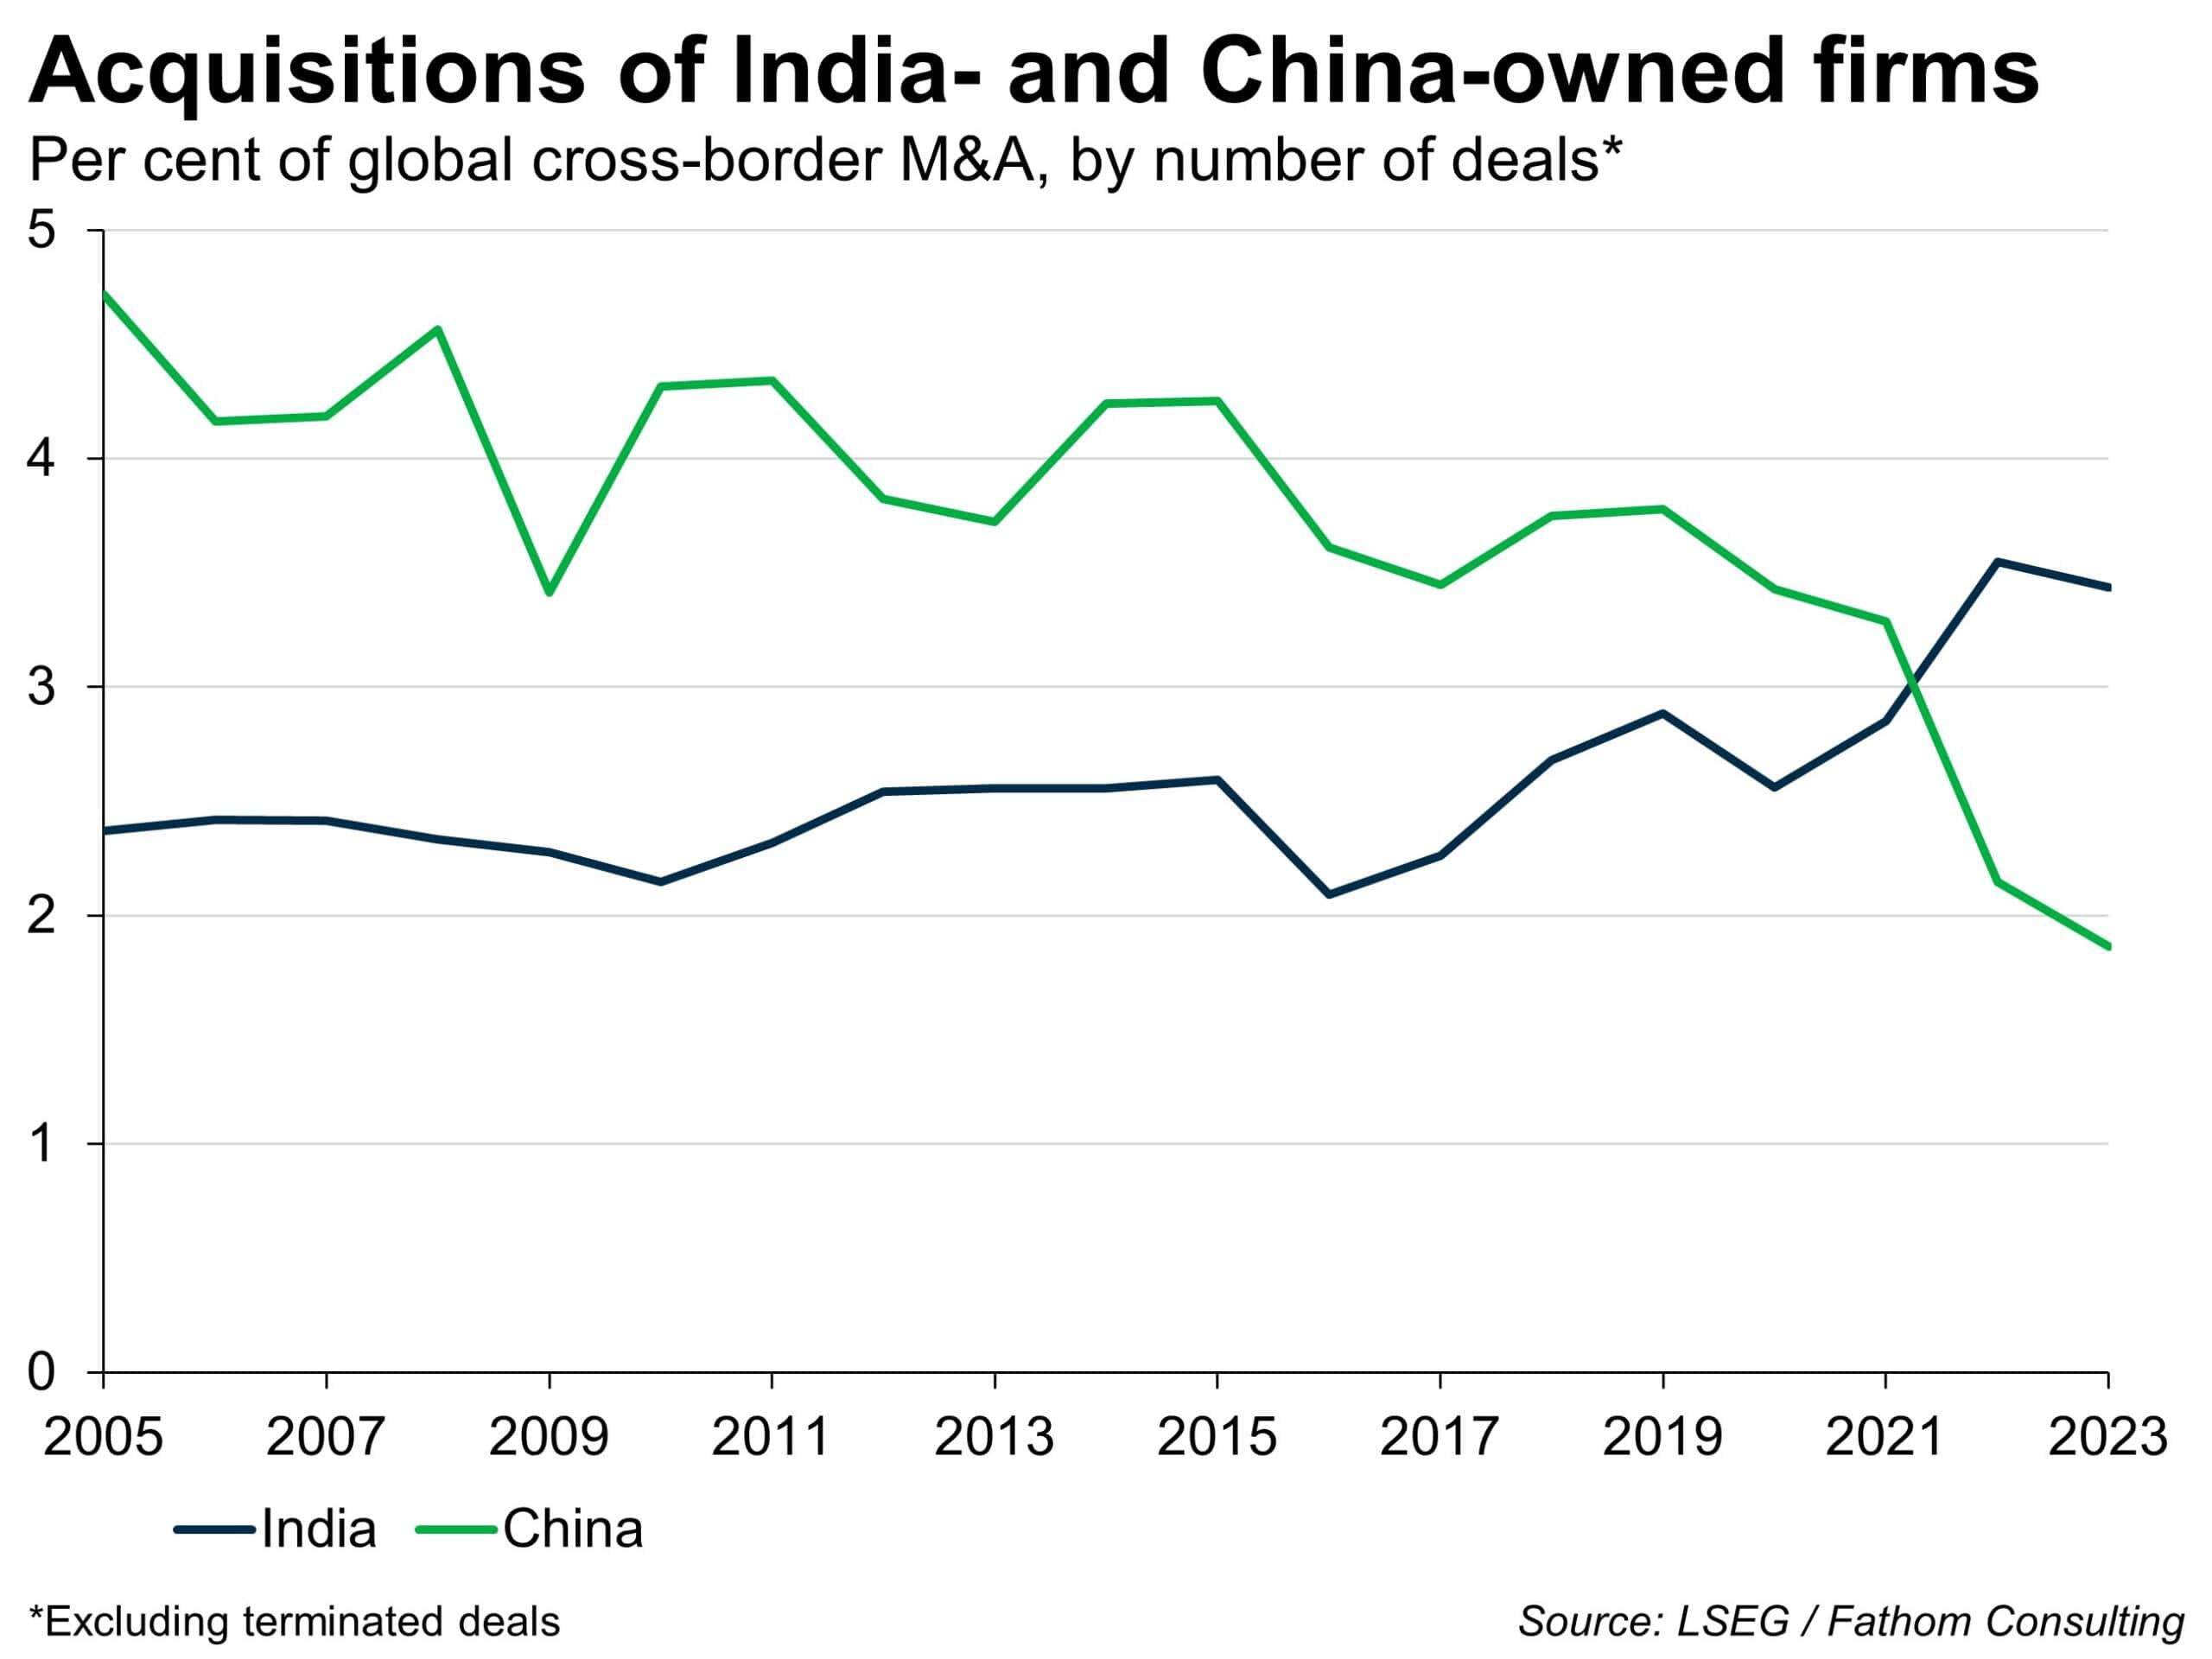 Acquisitions of India-owned and China-owned firms, as per cent of global cross-border M&A, by number of deals (excl terminated deals) 2005 to 2023